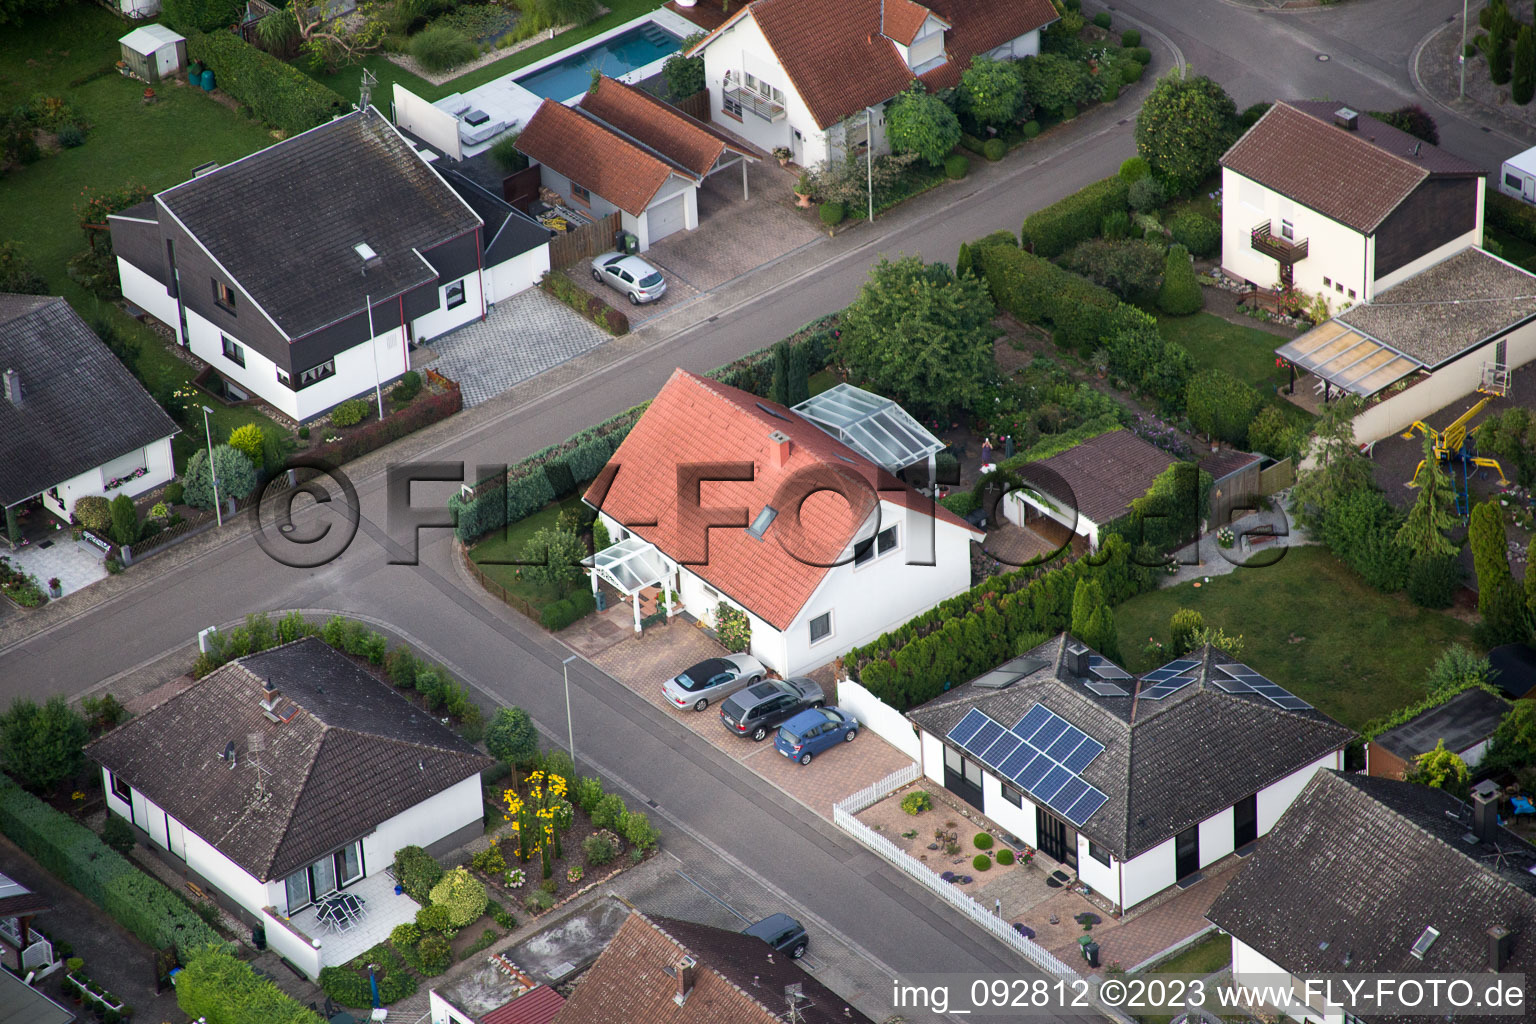 Drone image of Maxburgstr in the district Billigheim in Billigheim-Ingenheim in the state Rhineland-Palatinate, Germany